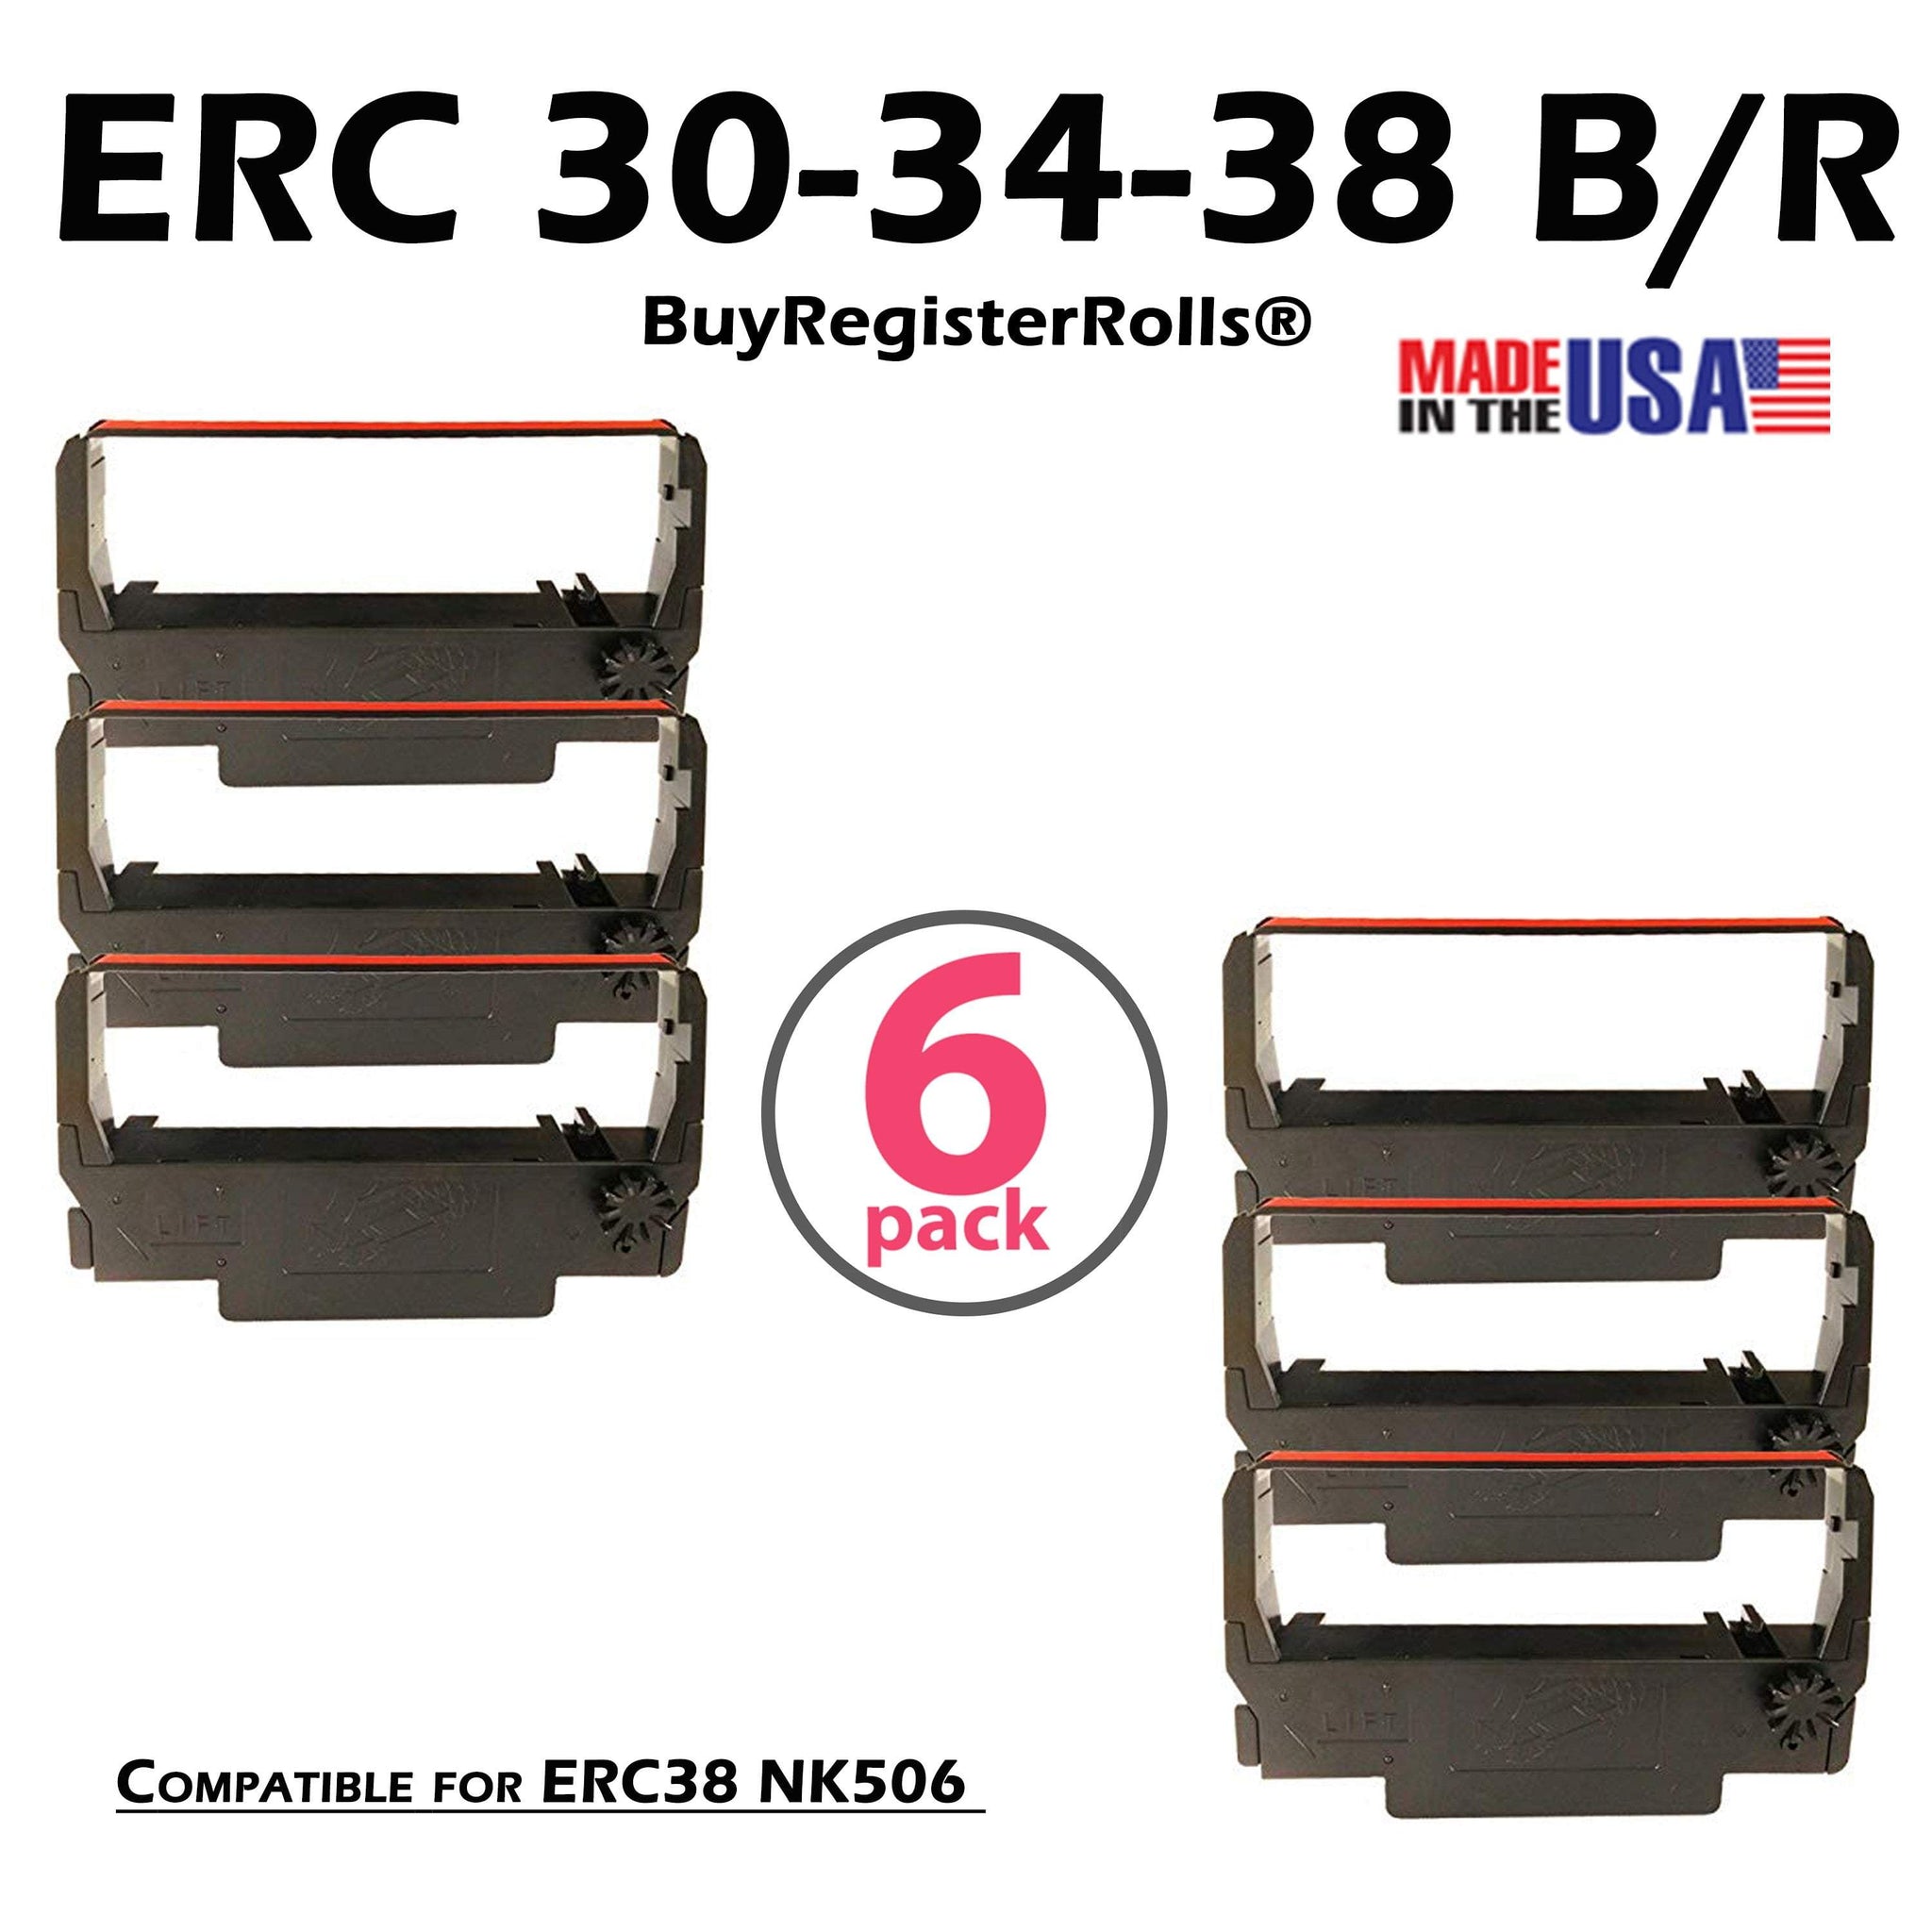 ERC30 ERC-30 ERC 30 34 38 B/R Compatible with Ribbon Cartridge for use in ERC38 NK506 (Black Red)